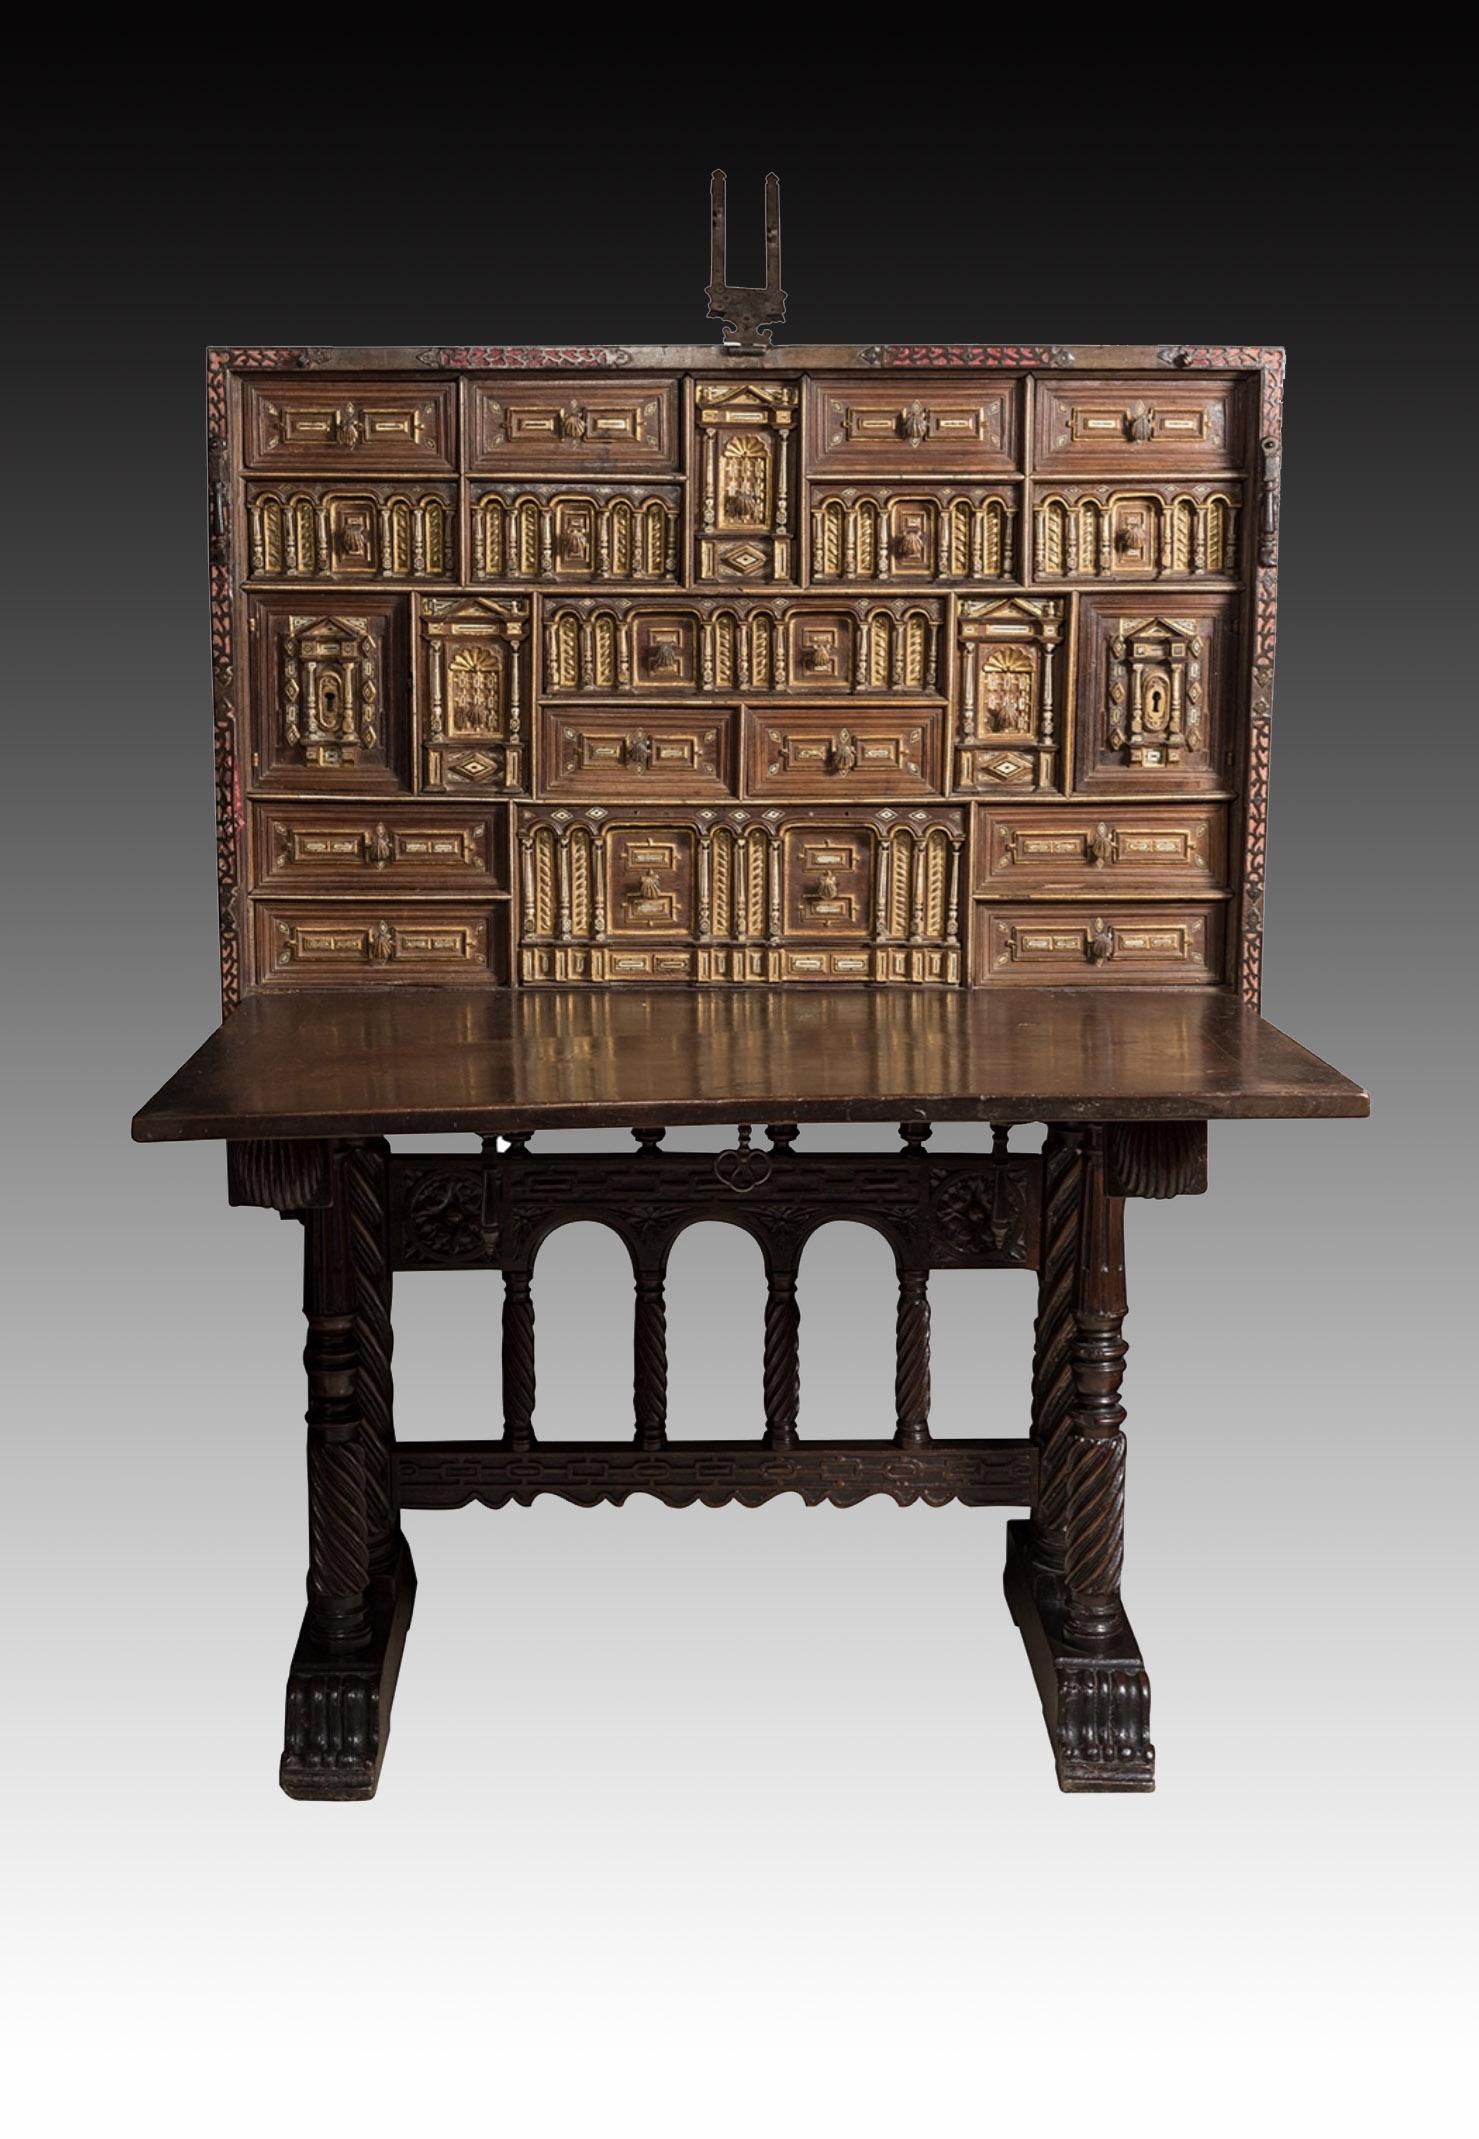 Spanish desk (“bargueño”). Walnut, etc. 17th century (support “de pie de Puente” or “bridge-shapped”, 19th century). 
It has restorations; later metal fittings.
“Bargueño” type Spanish desk with folding cover, which has been decorated on the